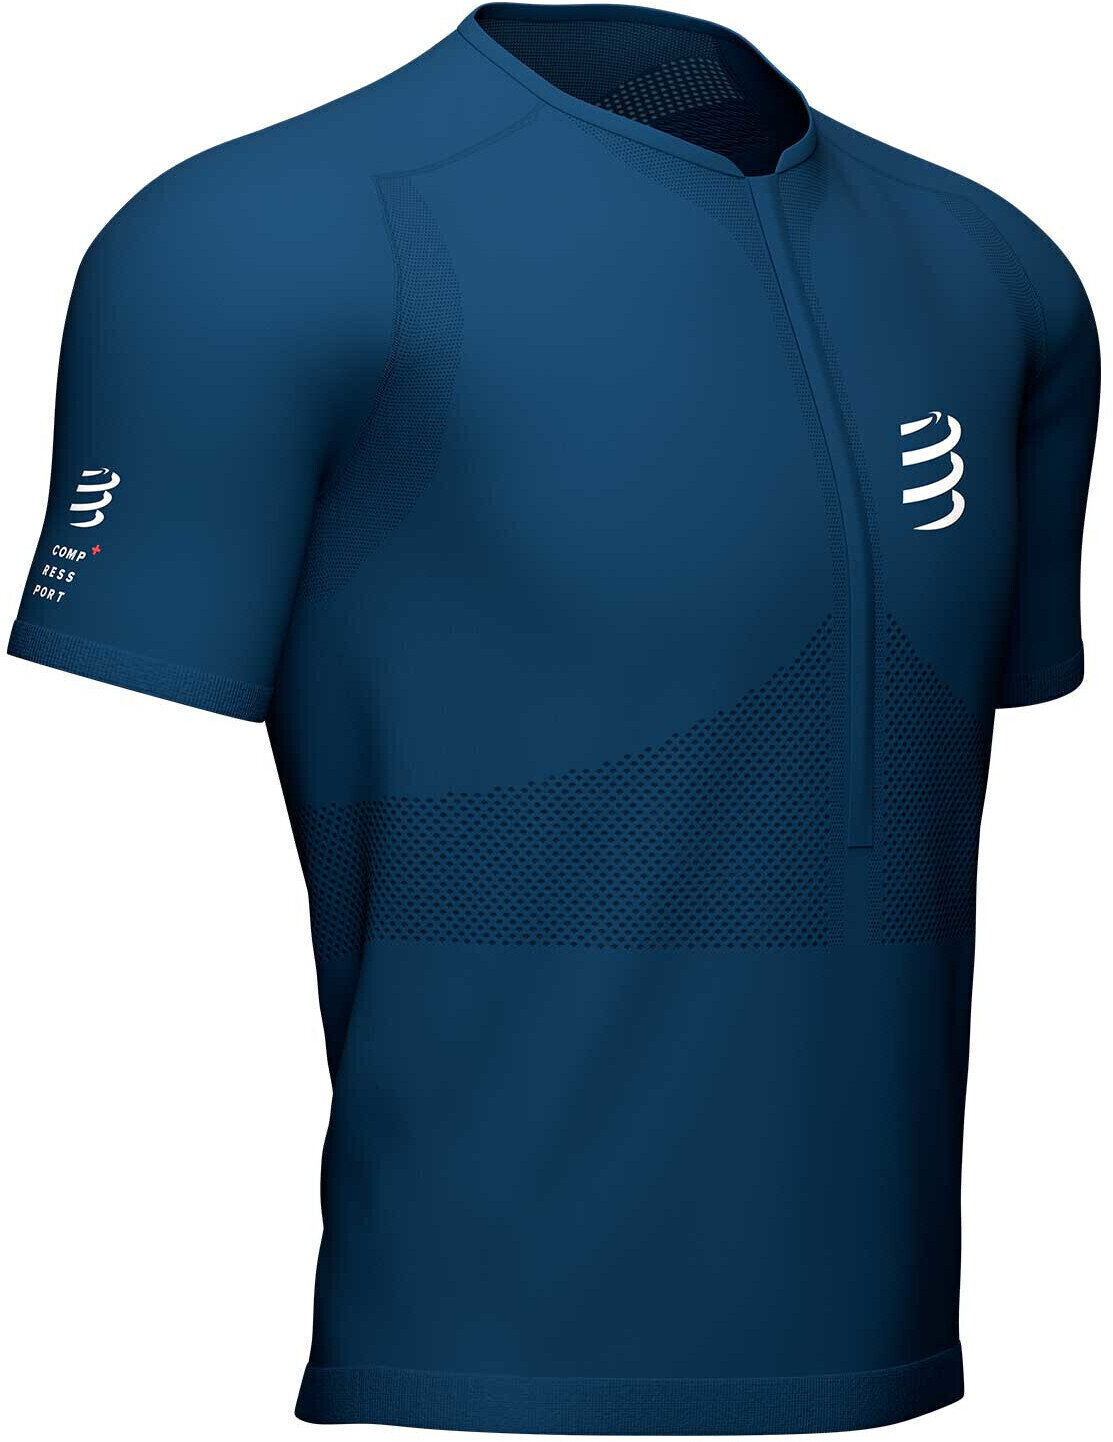 Running t-shirt with short sleeves
 Compressport Trail Half-Zip Fitted SS Top Blue S Running t-shirt with short sleeves